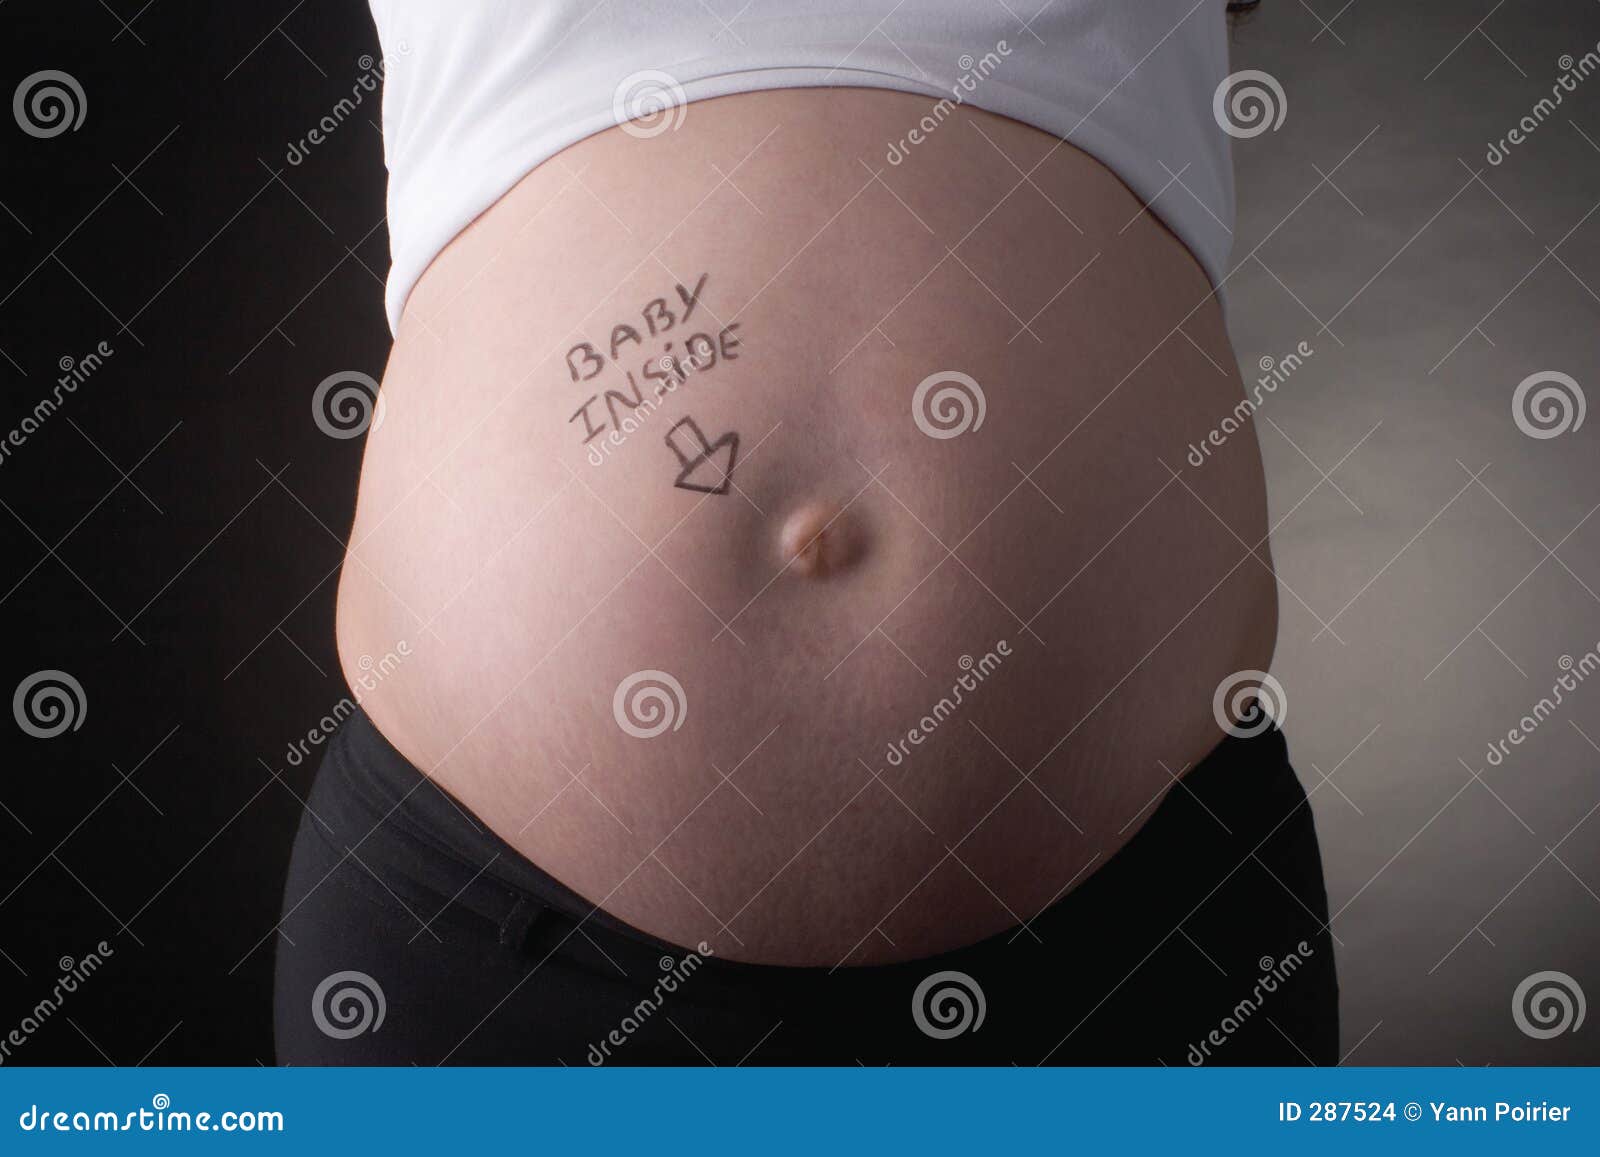 Baby Inside Belly Stock Images - Image: 287524